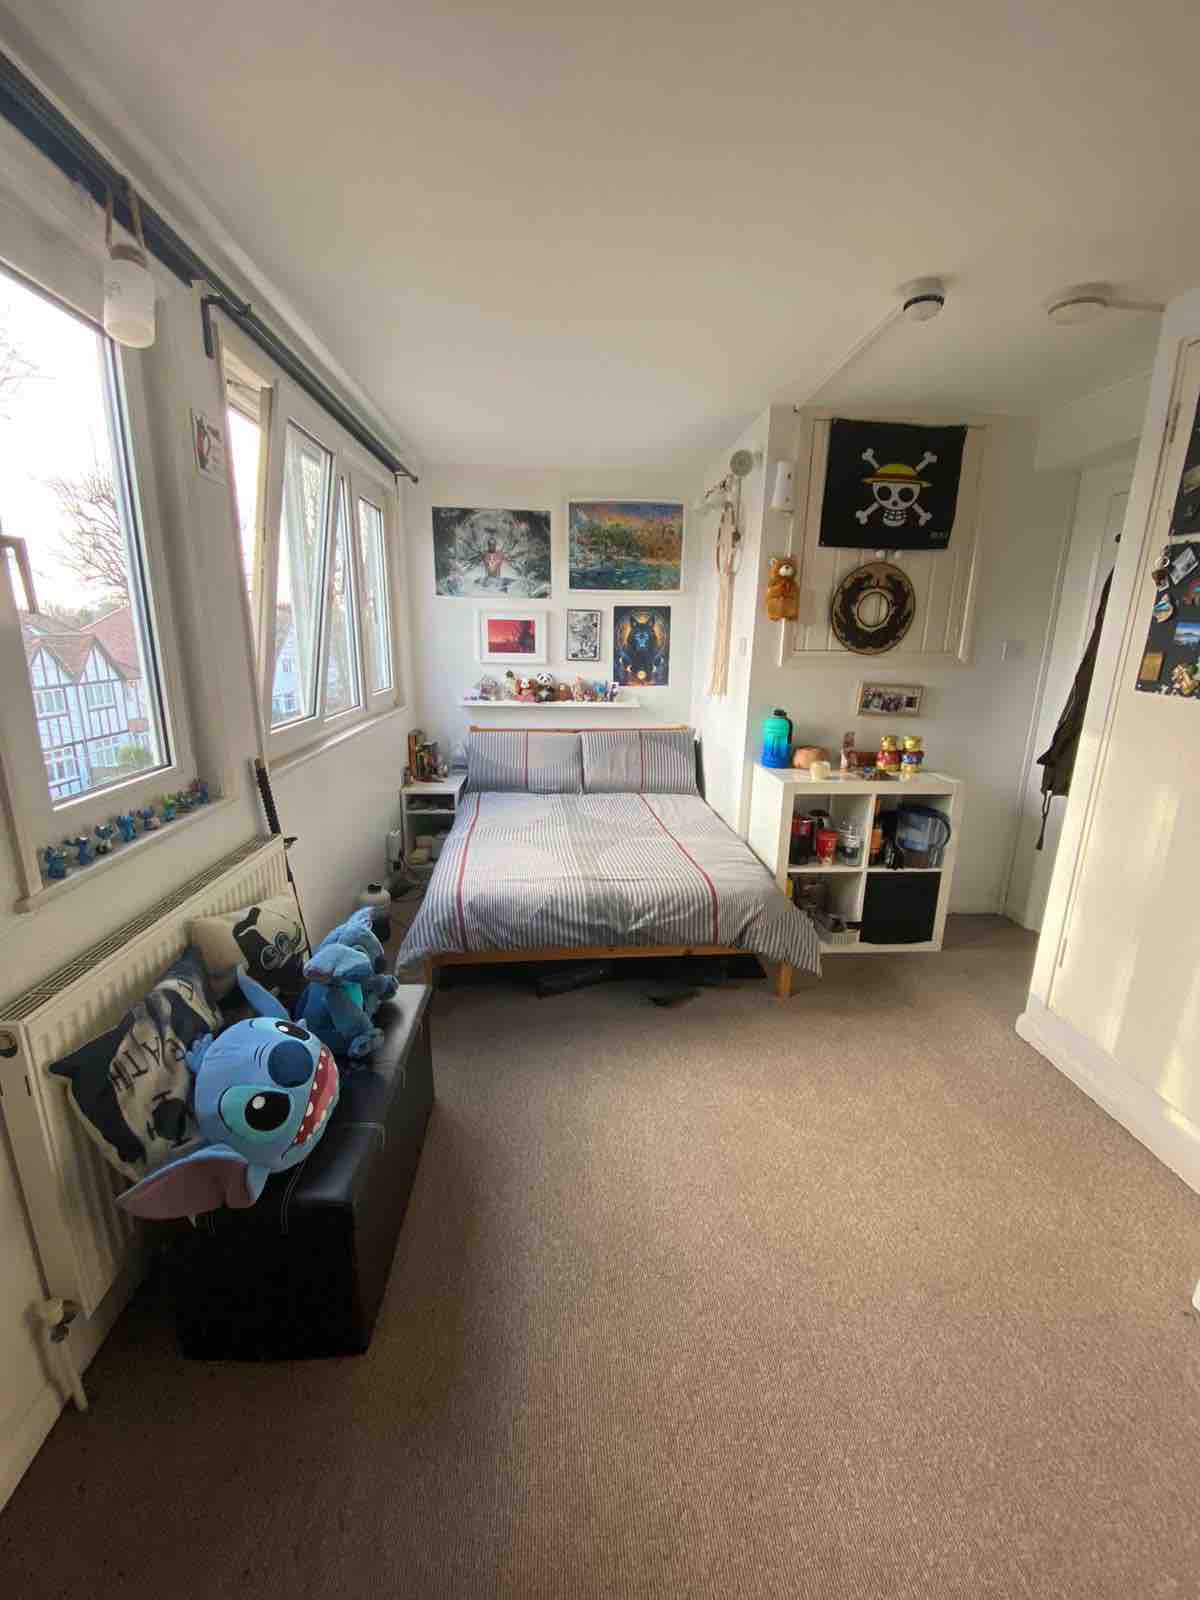  RoomsLocal image